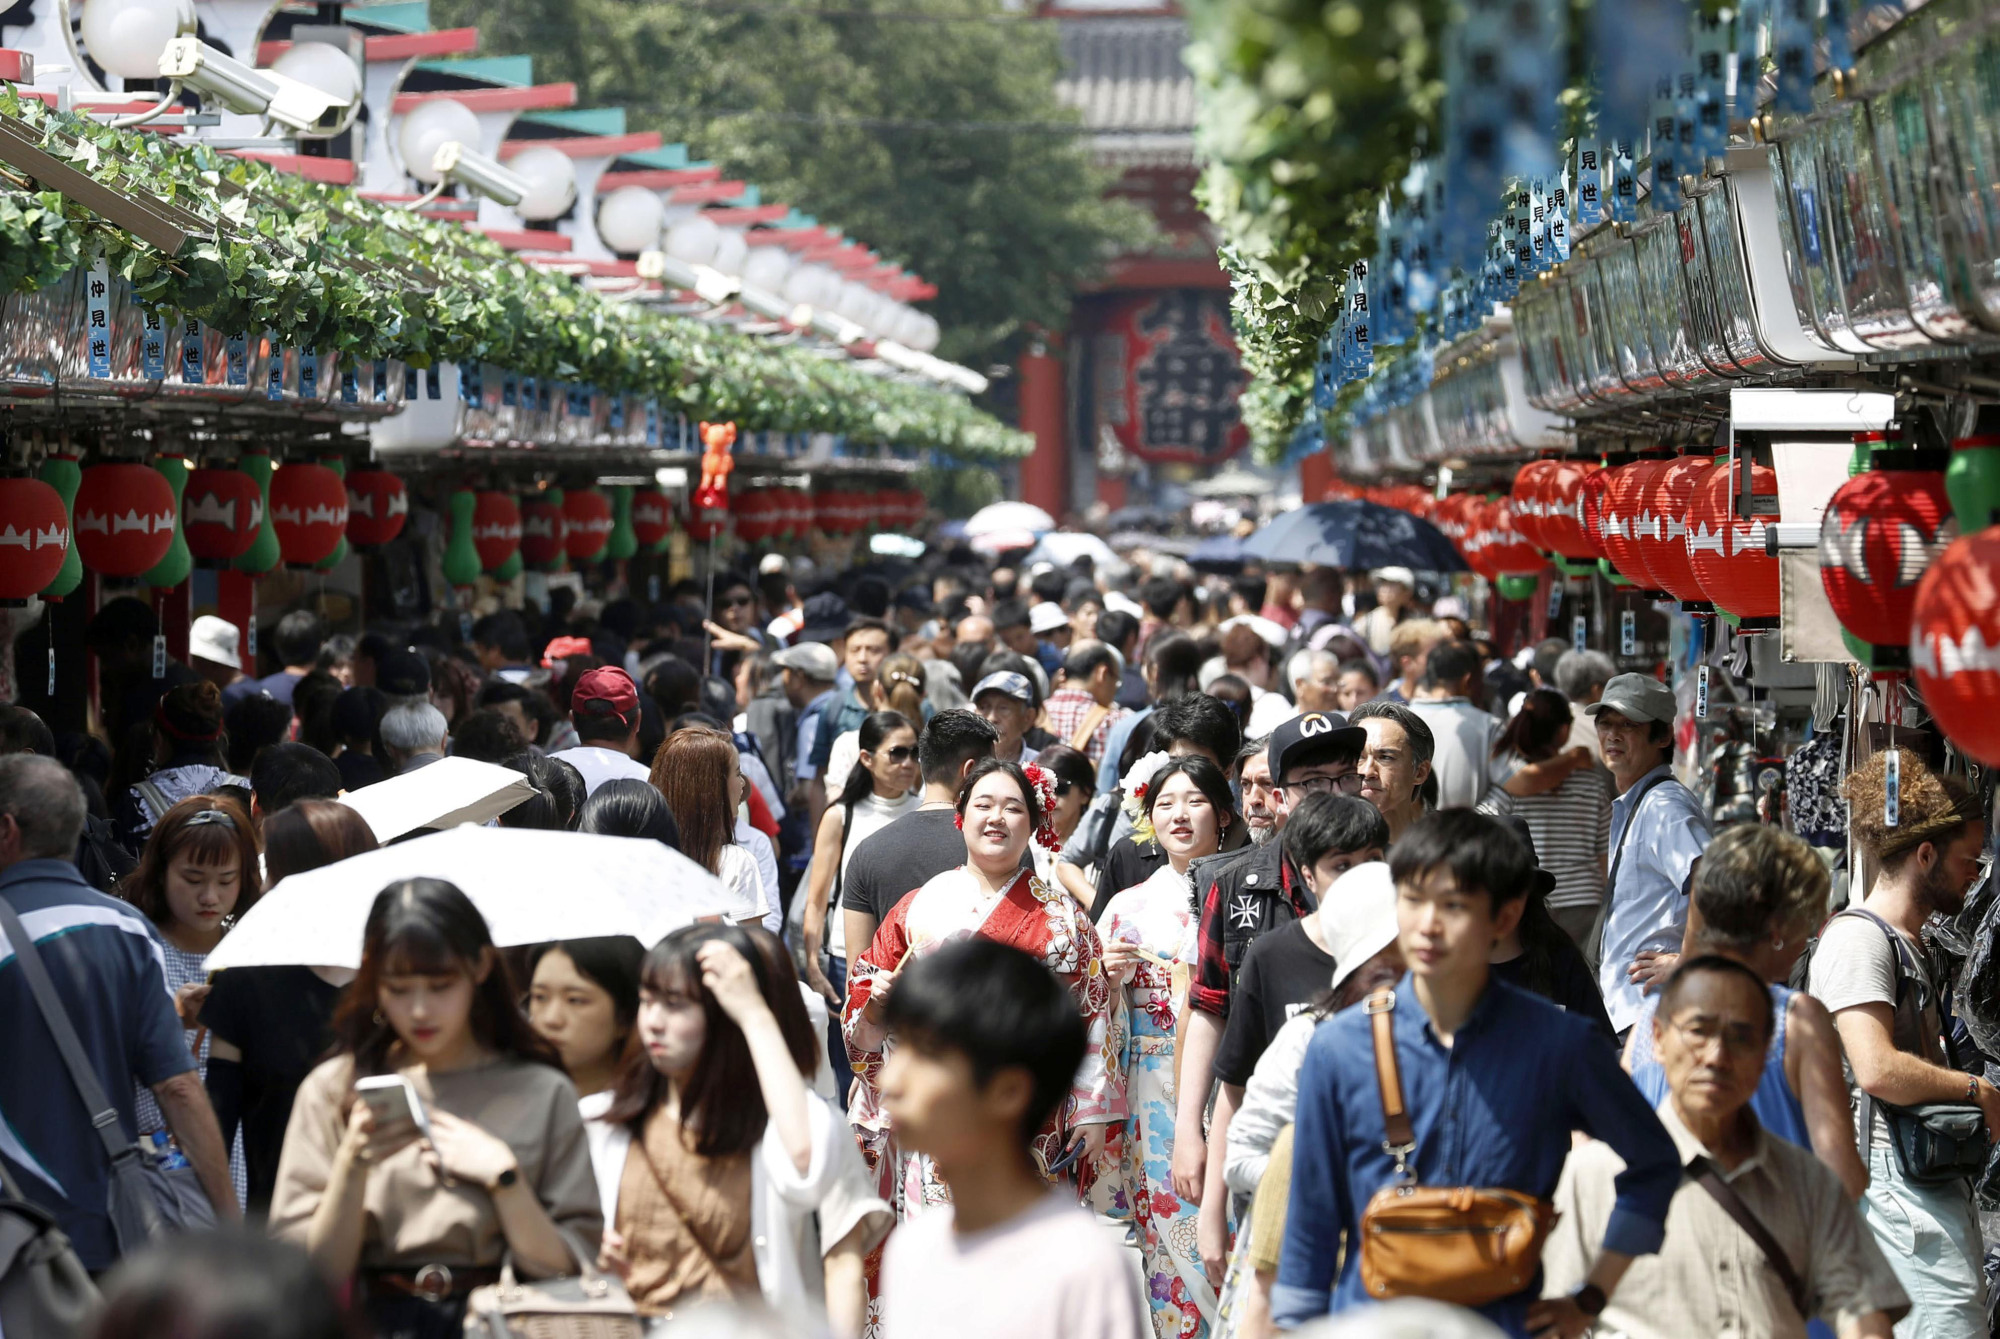 The Nakamise shopping street in the Asakusa district of Tokyo is crowded with tourists on July 17. | KYODO